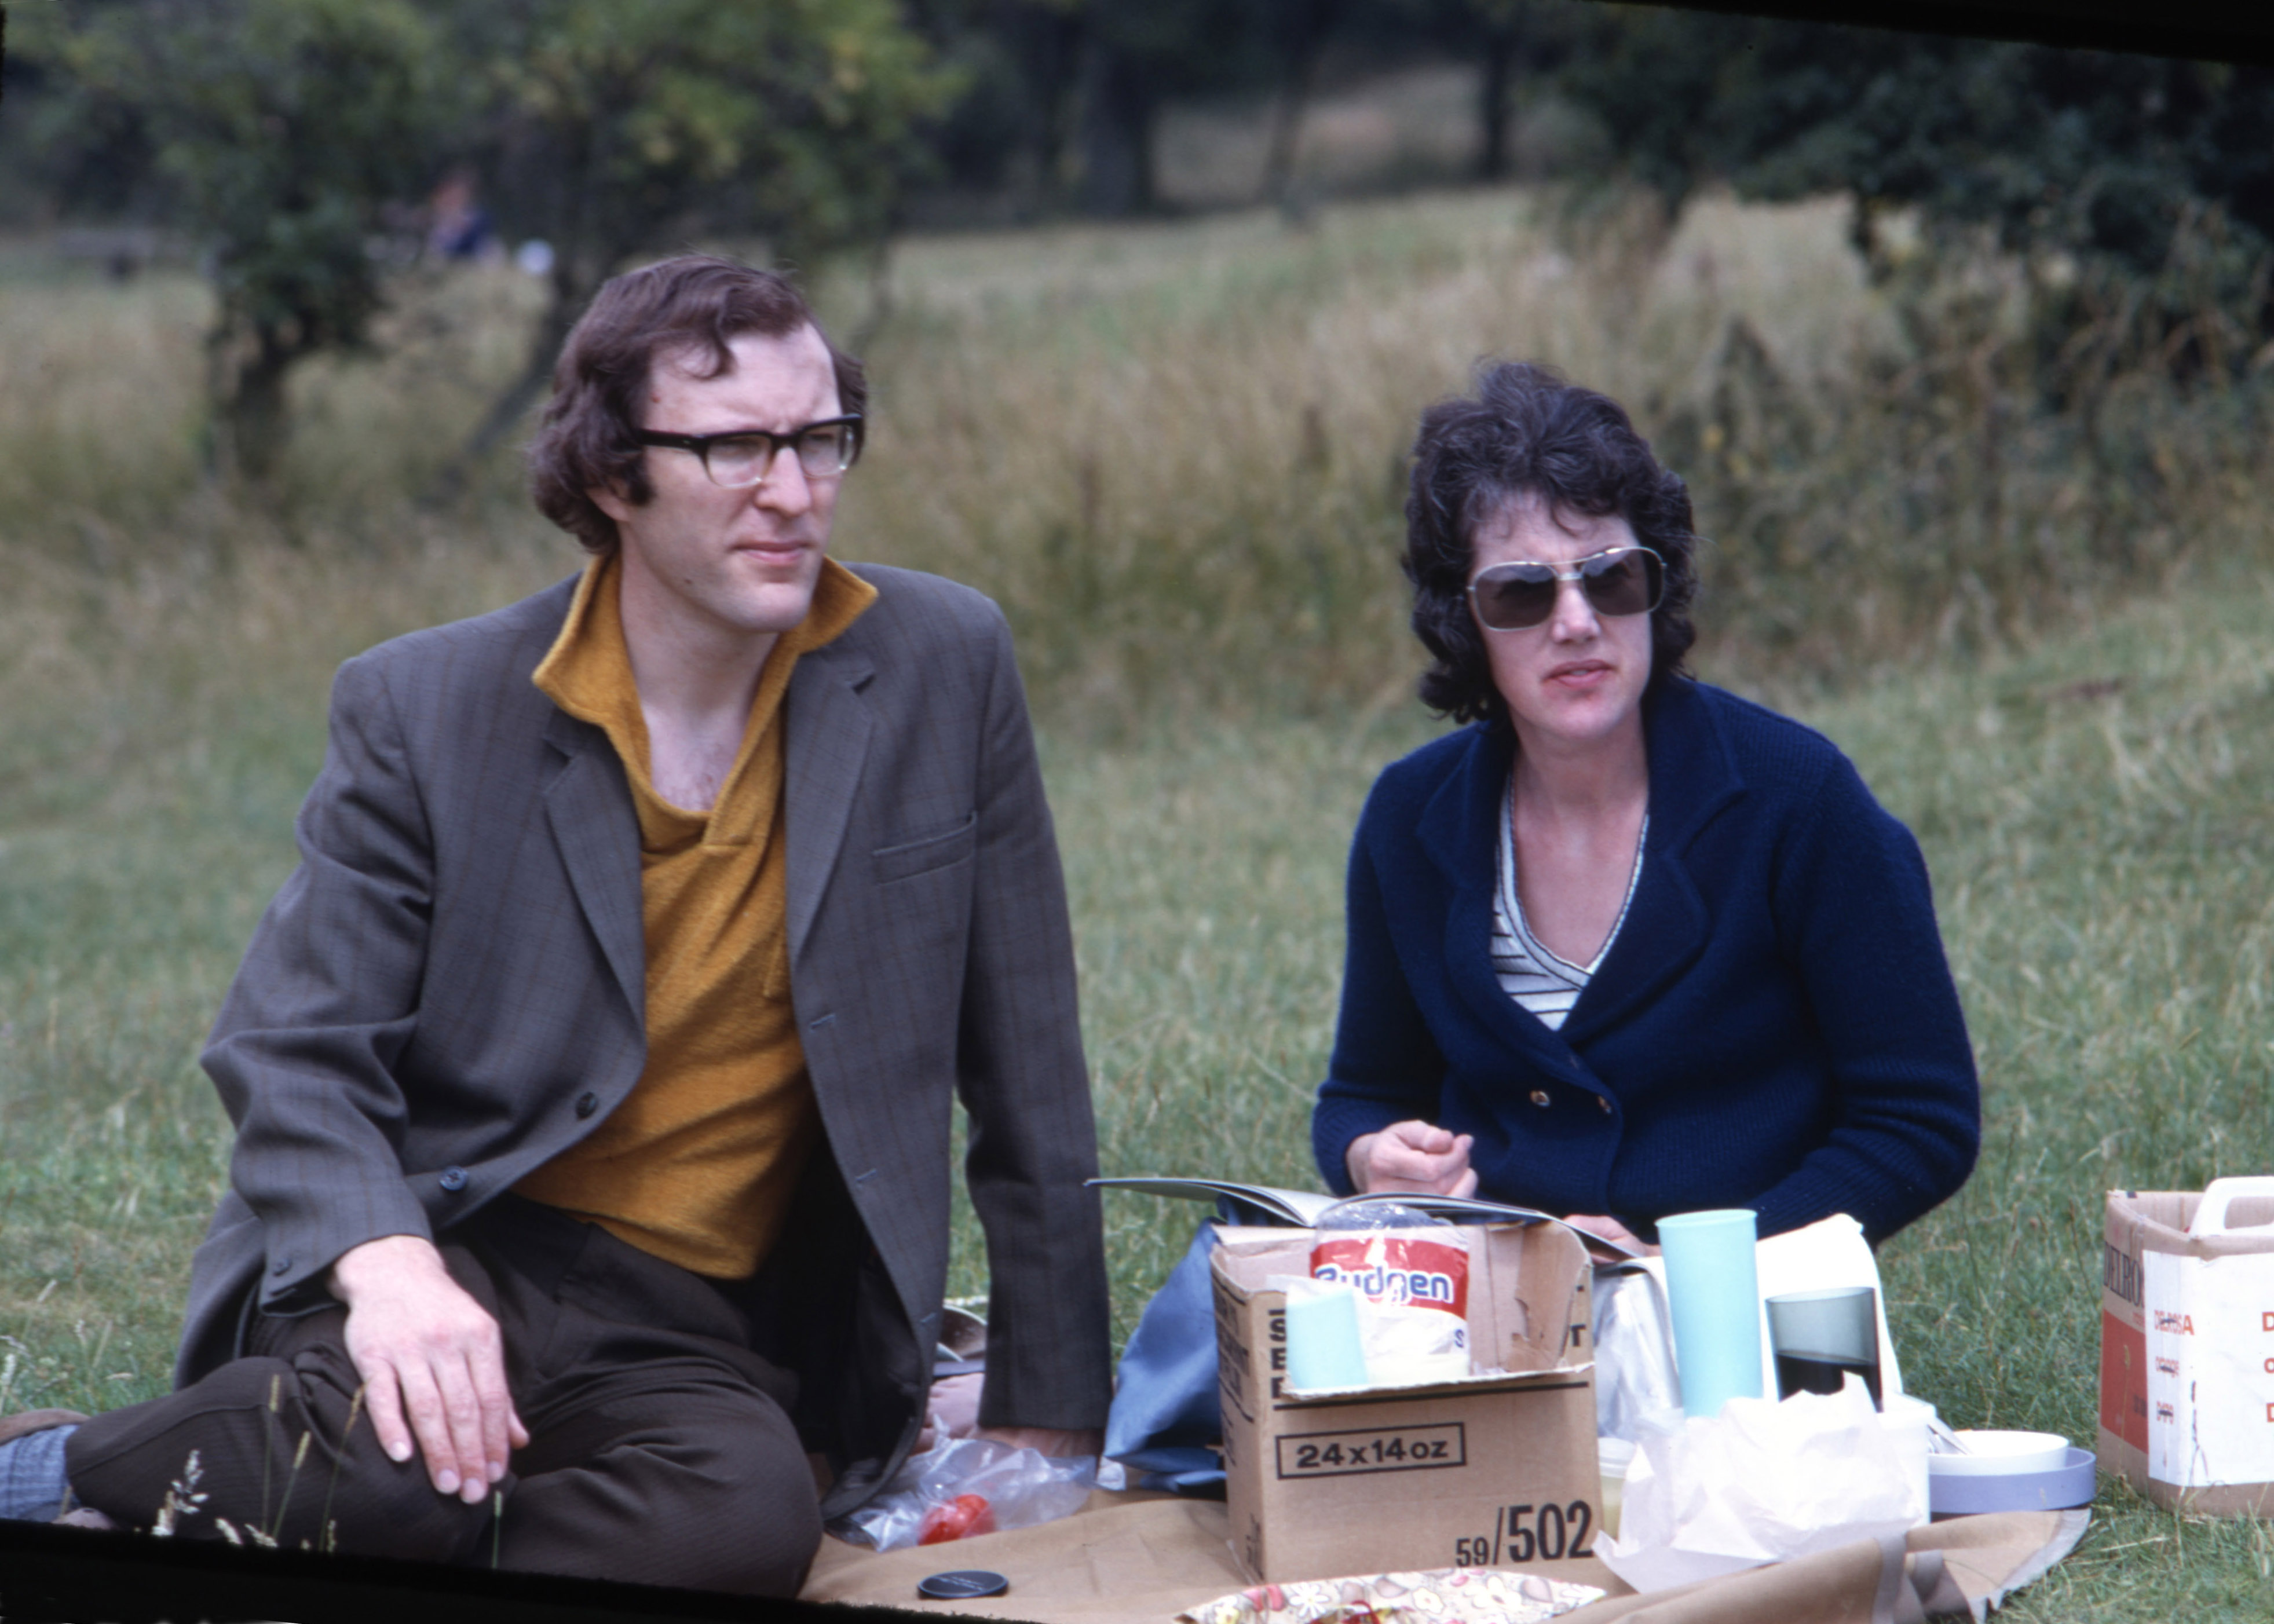 7404312 August 1974 - We are having a picnic on a visit to Whipsnade.